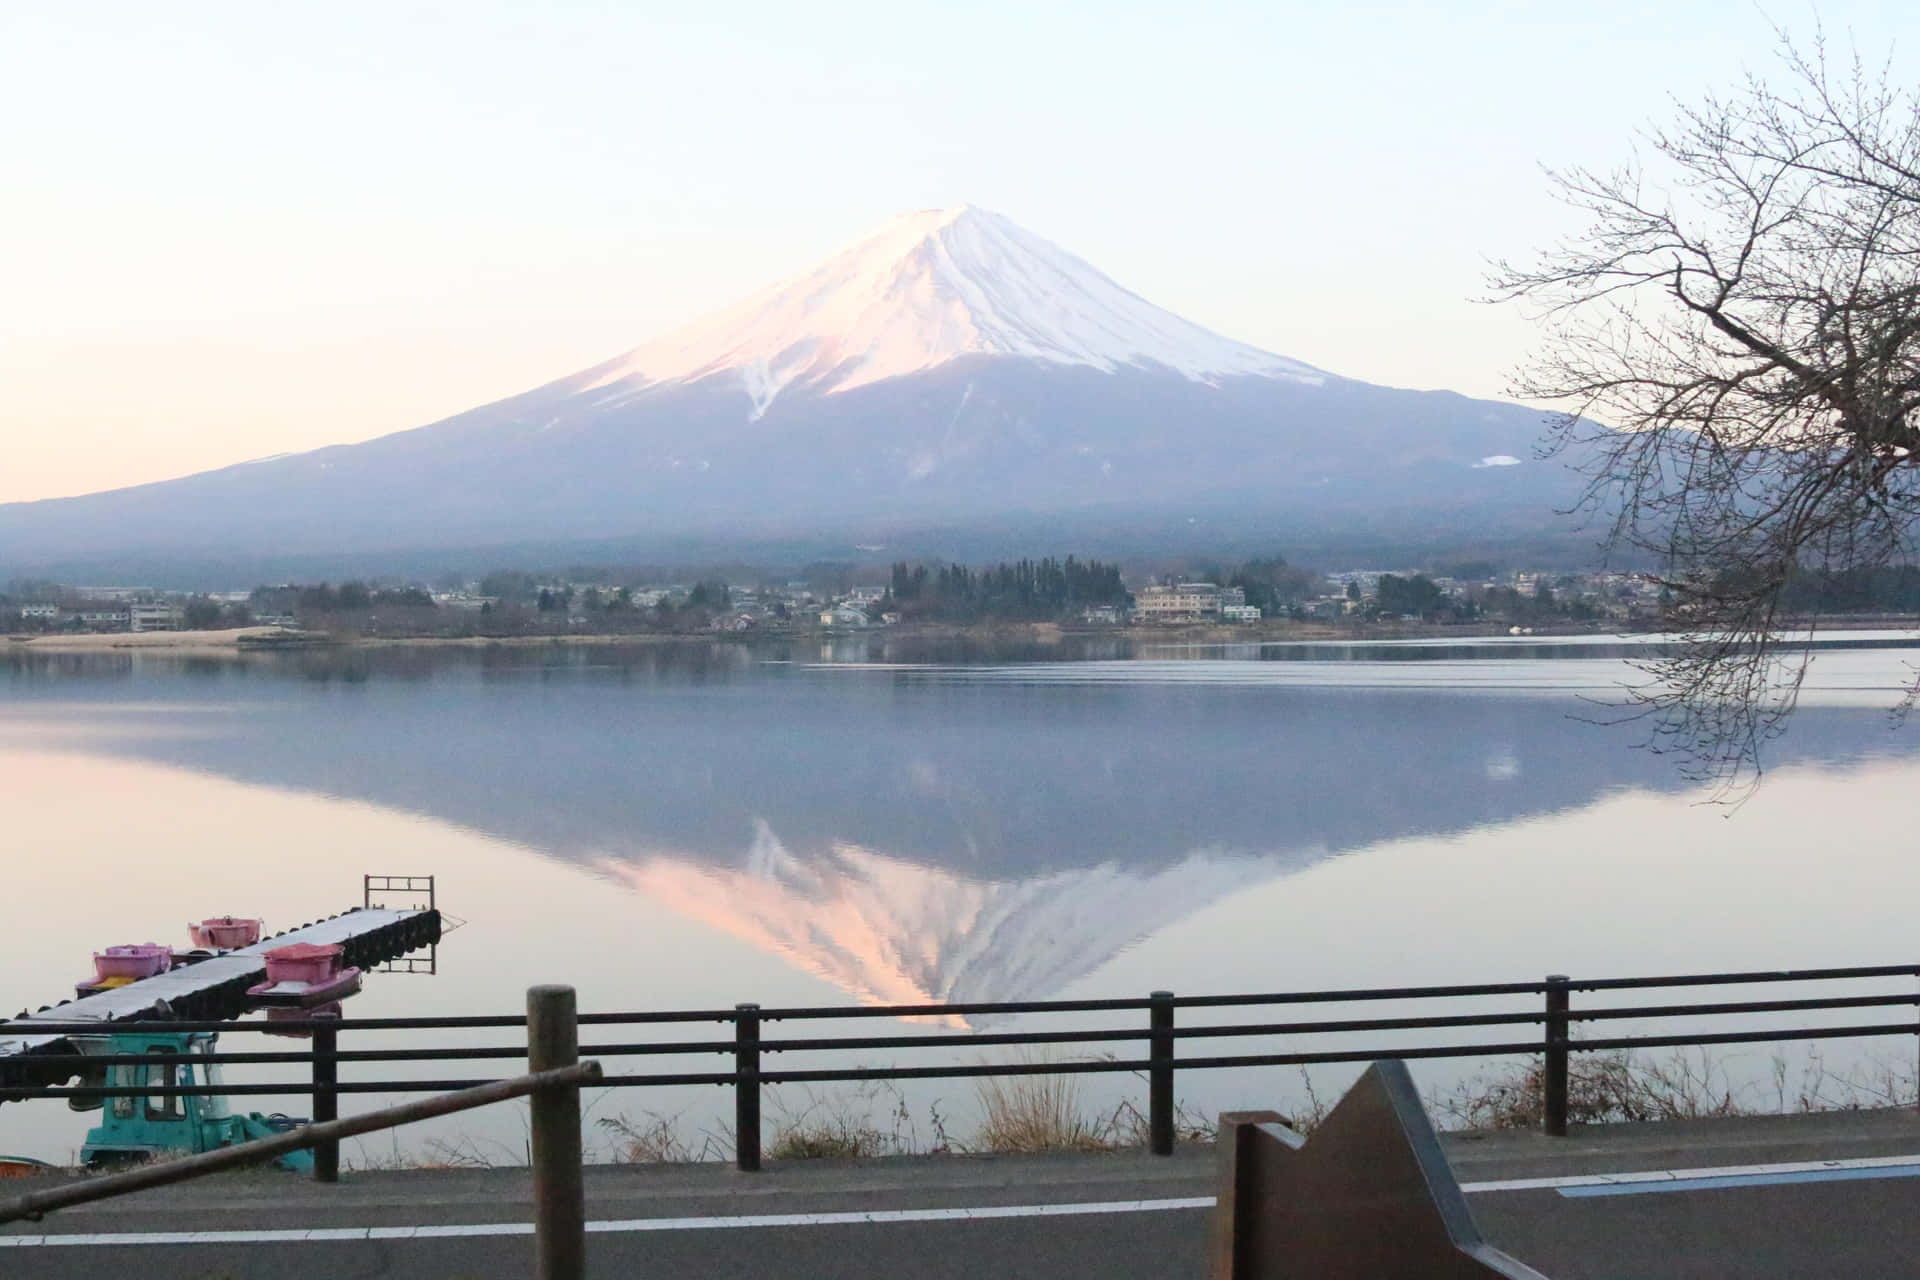 The majestic Mt Fuji stands tall above a navy blue sea.